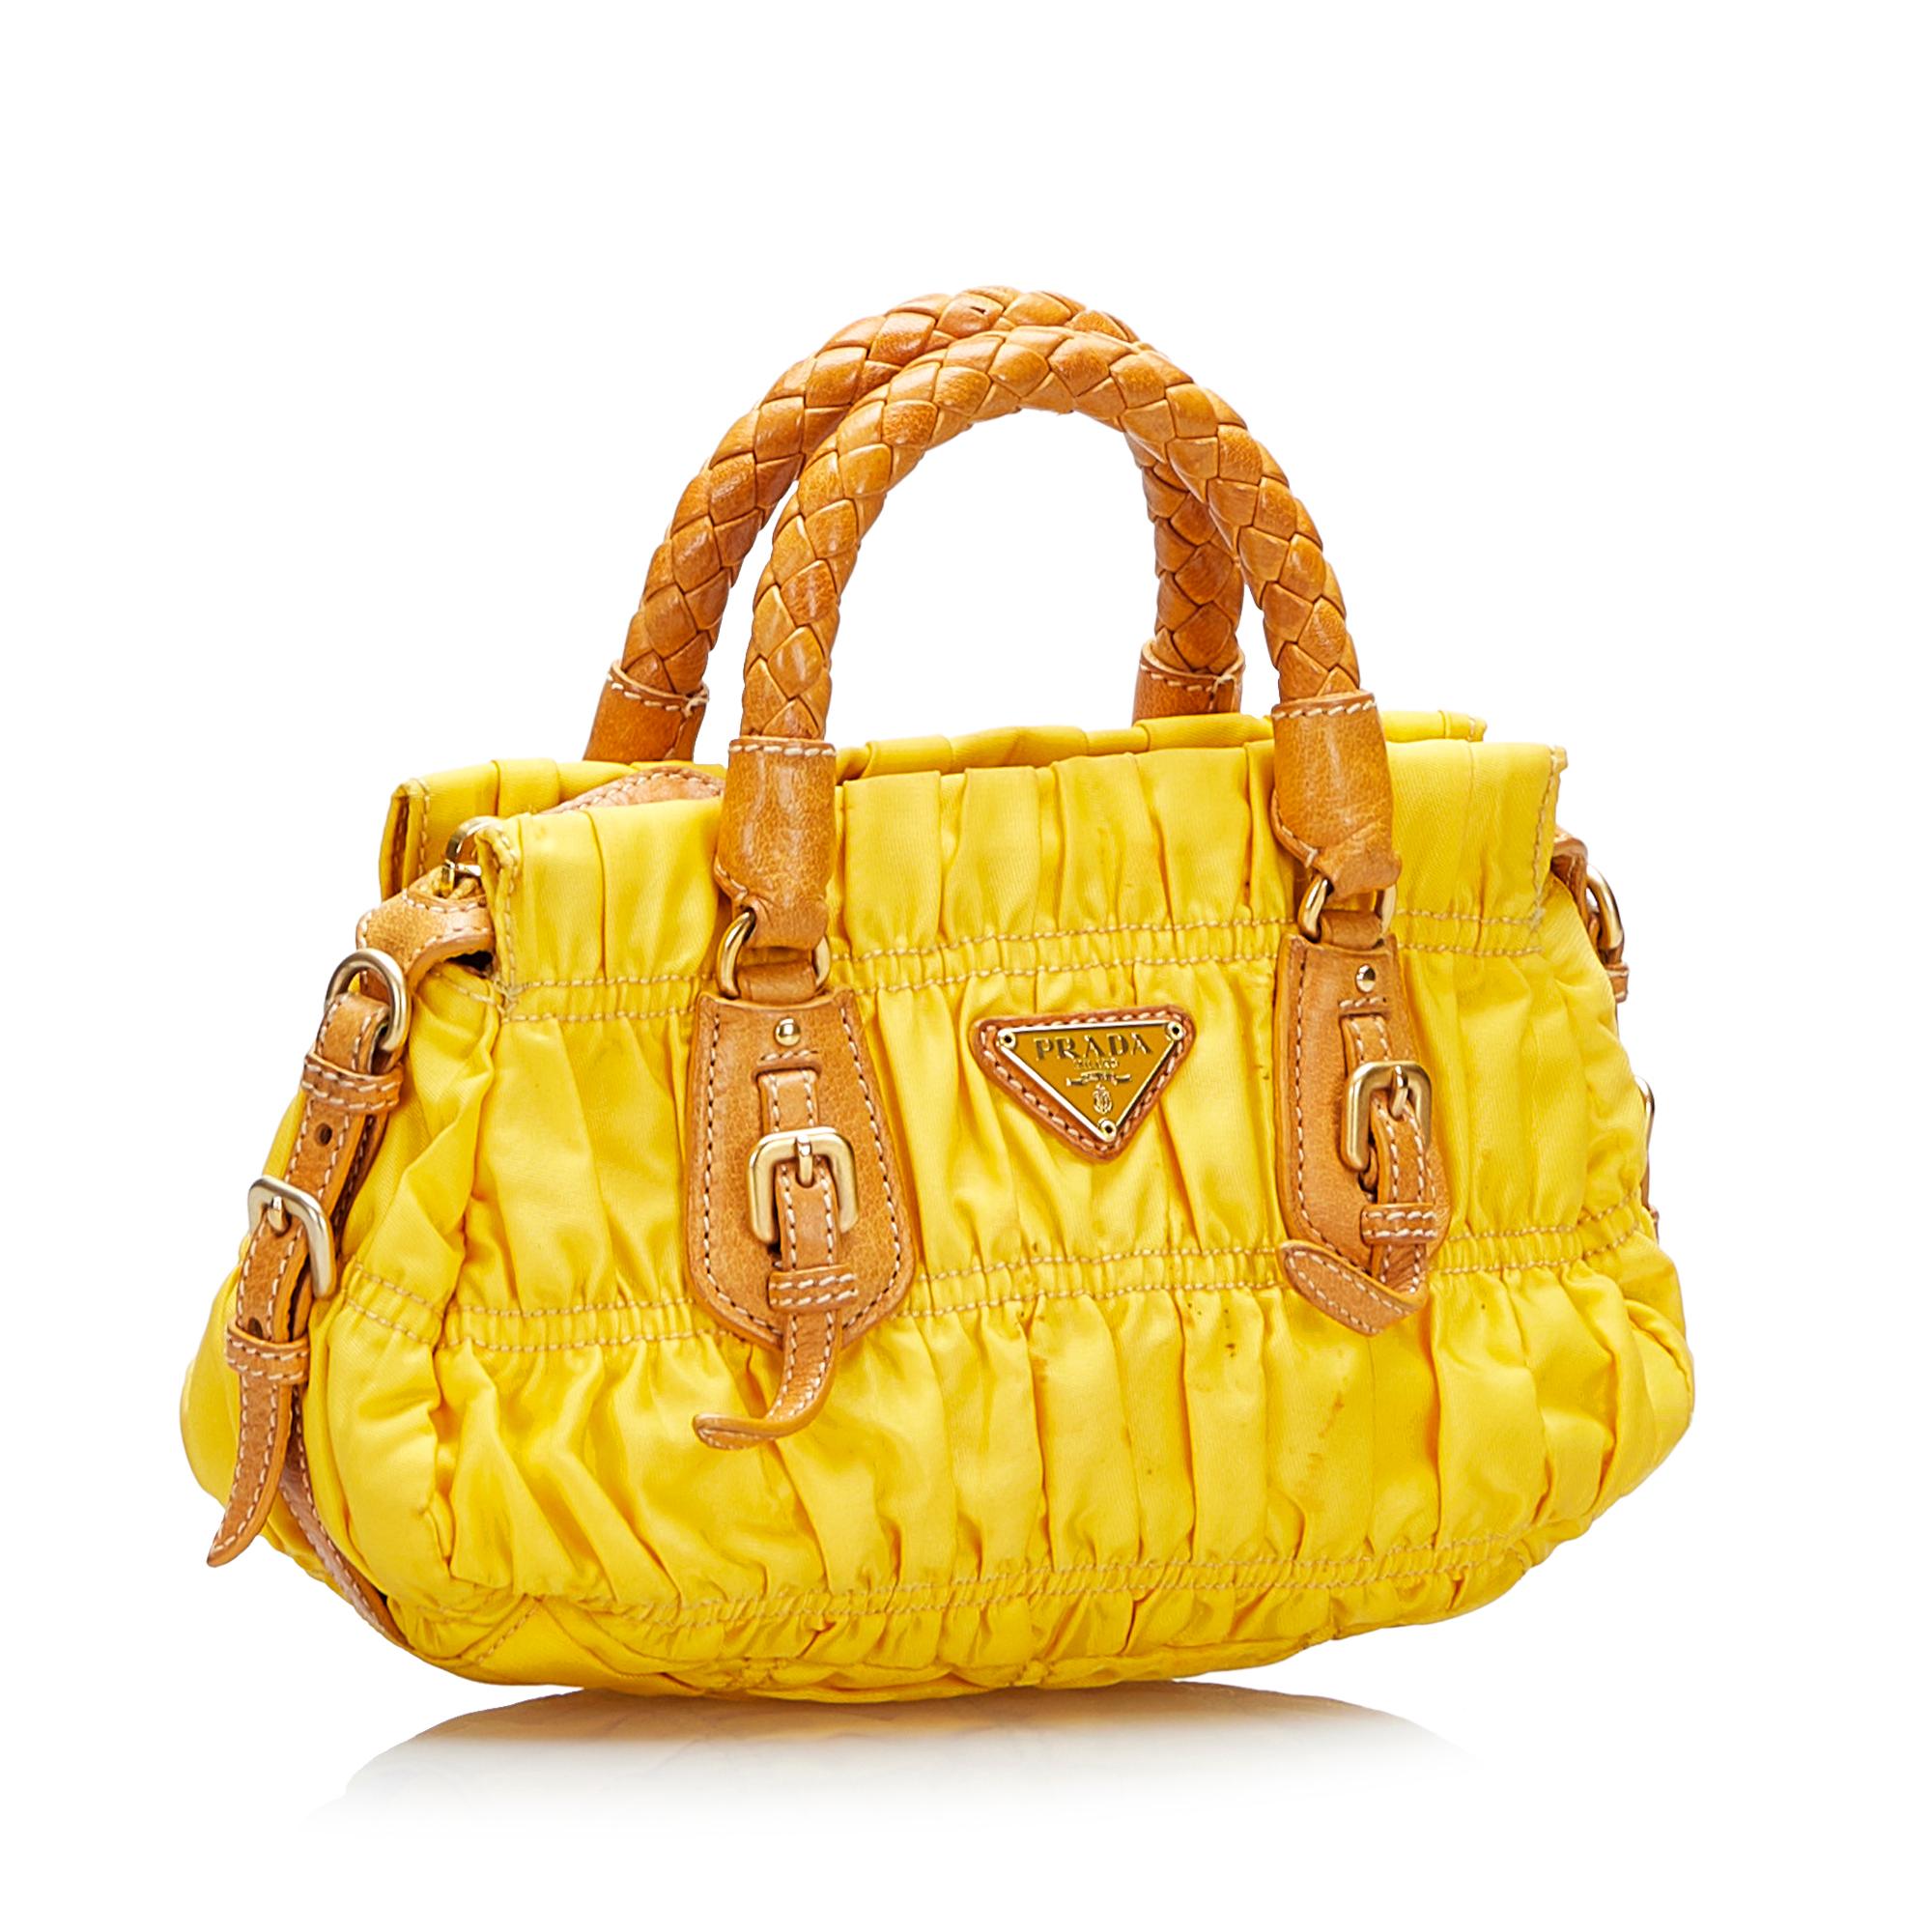 Product Details: Yellow Prada Tessuto Gaufre Satchel Bag. This satchel features a gathered nylon body, rolled leather handles, a detachable flat leather strap, an open top with a magnetic snap button closure and interior zip and slip pockets. 4.1